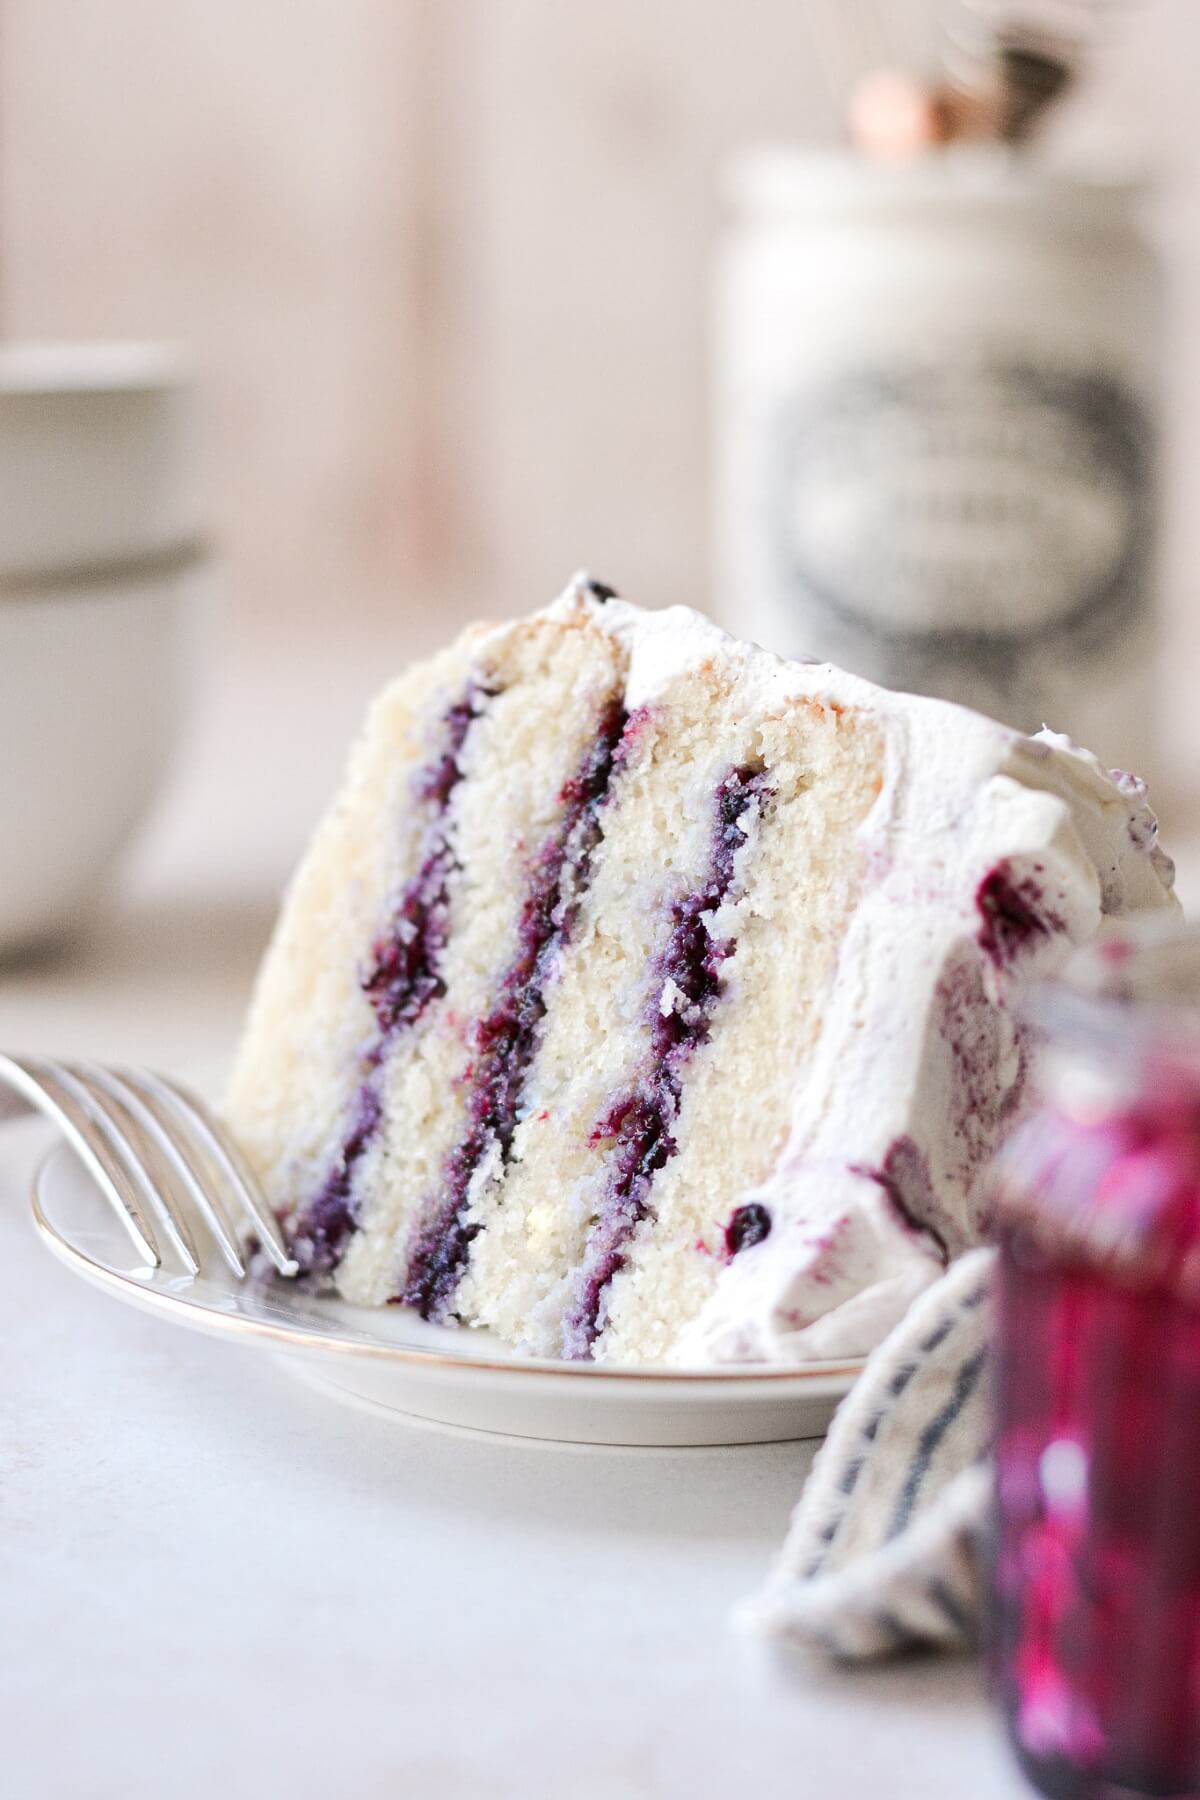 A slice of blueberry jam and cream chantilly cake.